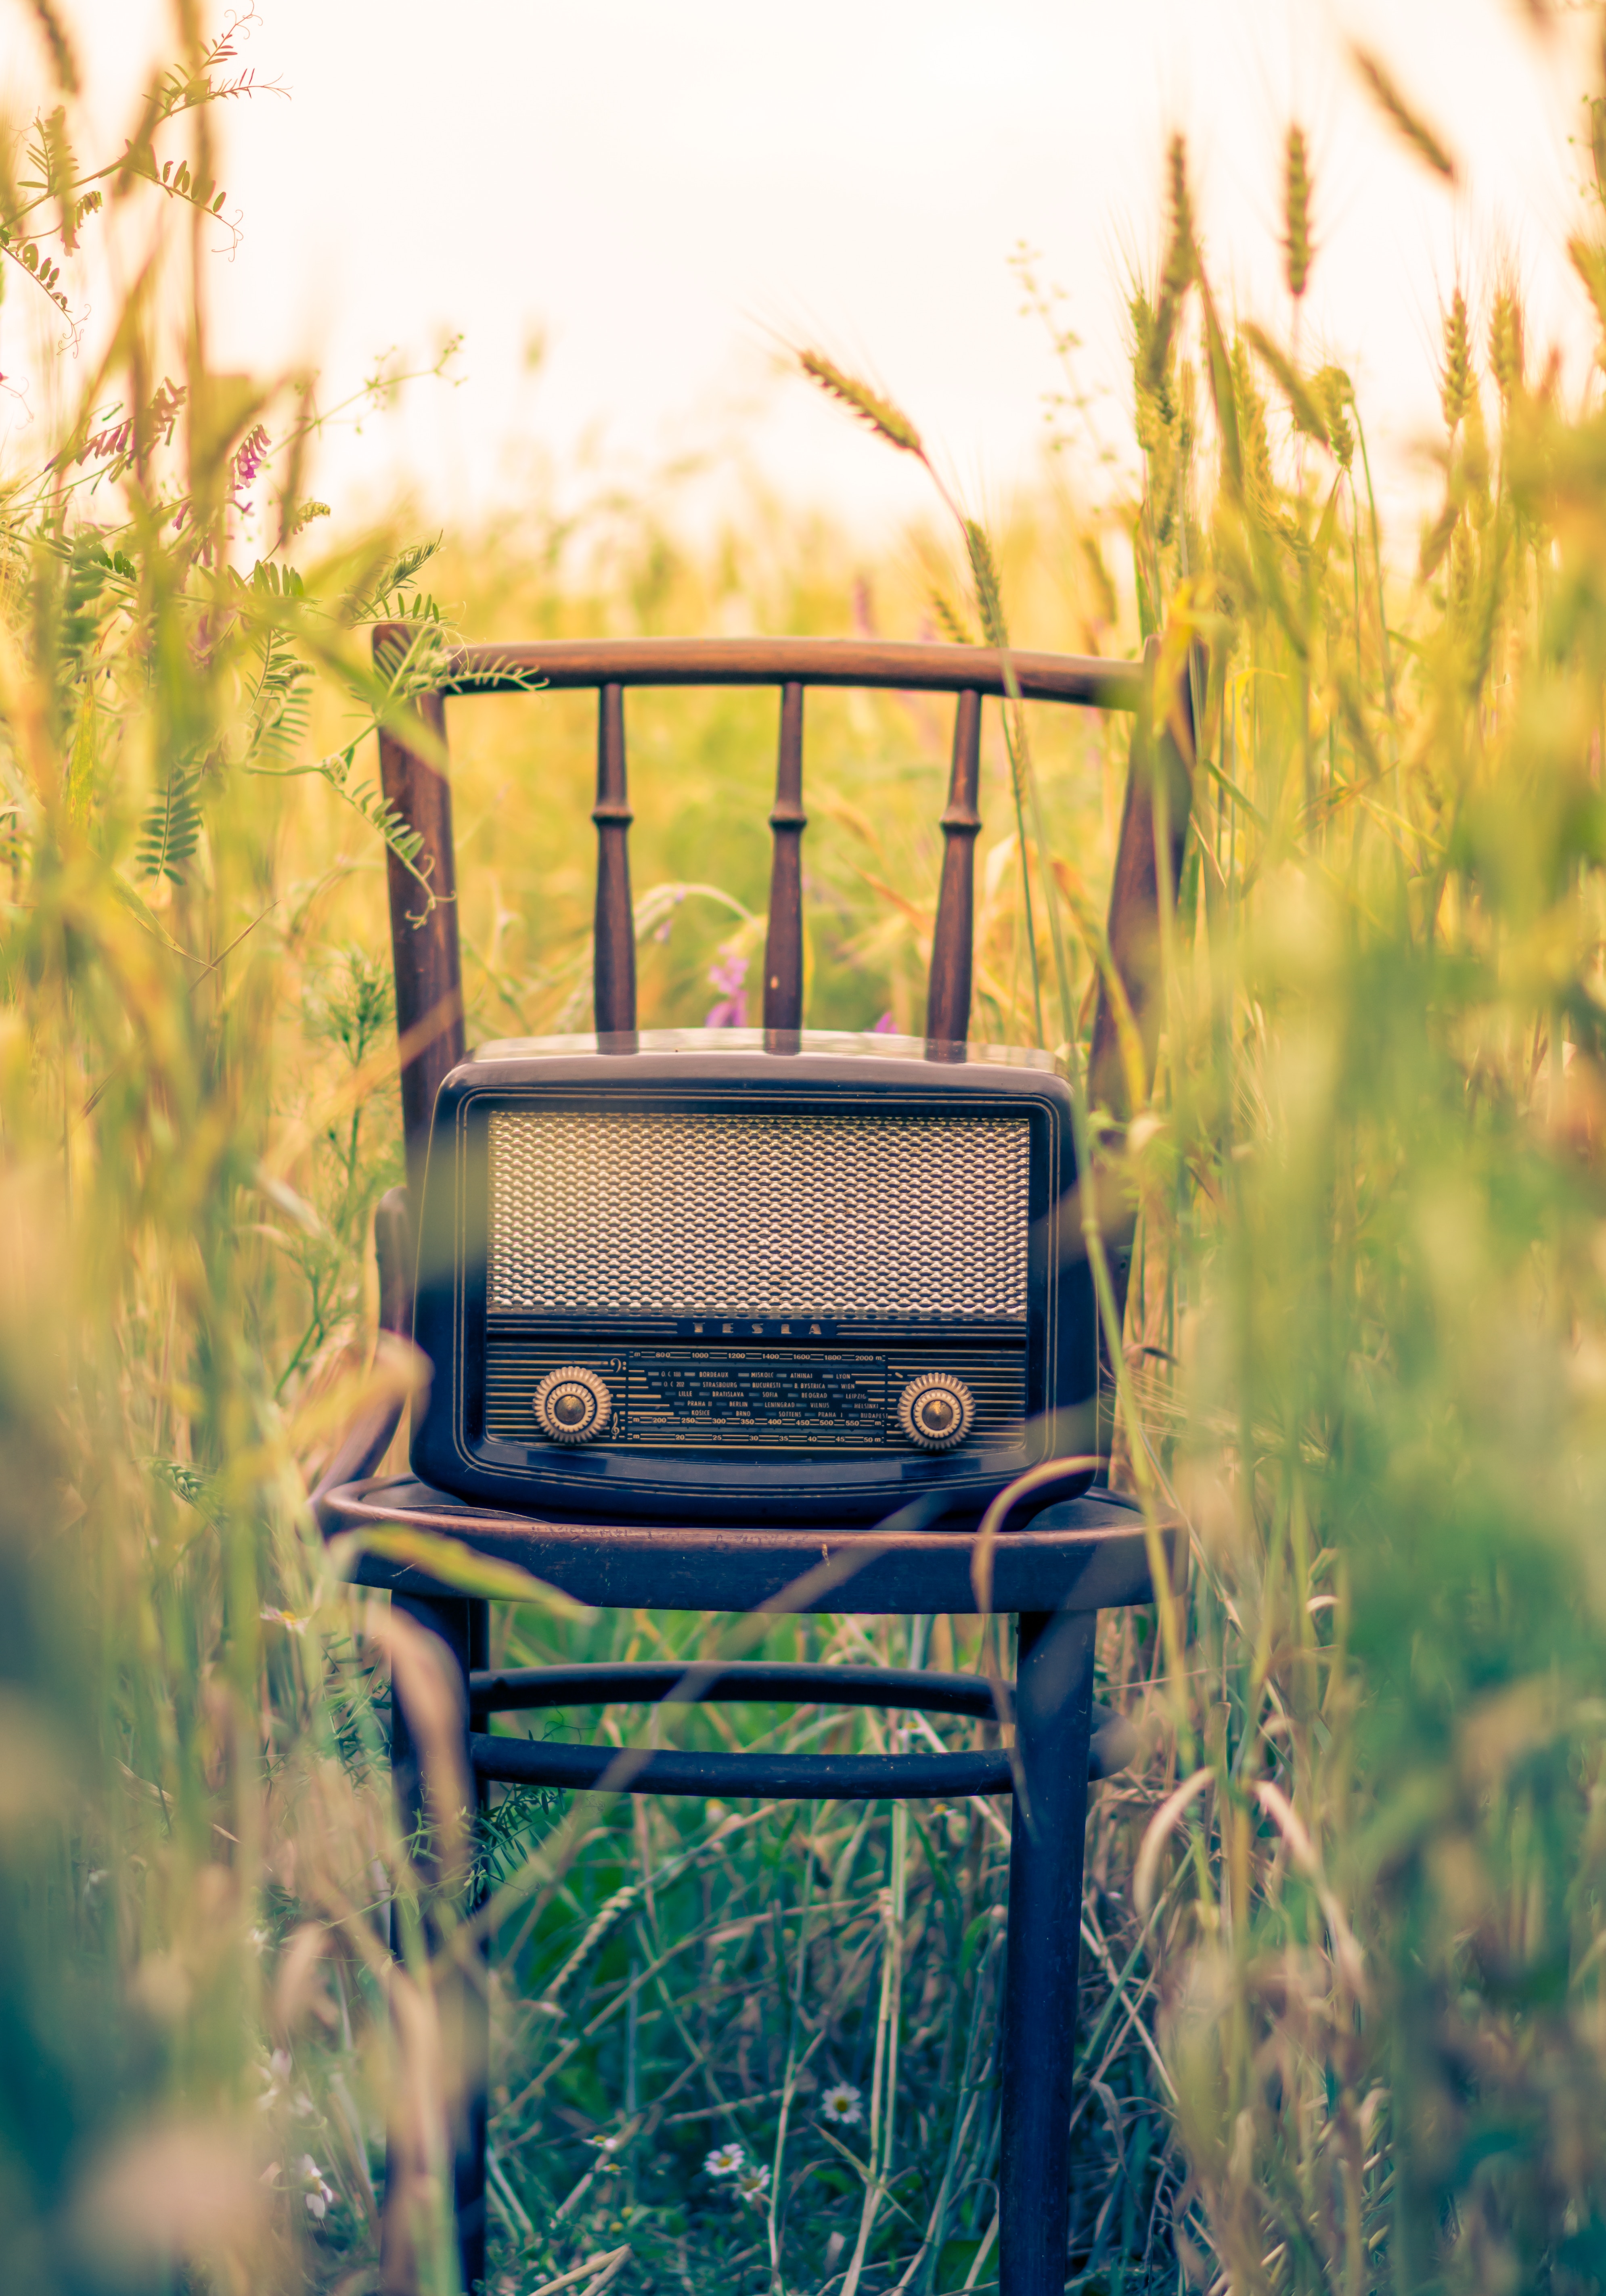 Free Images smooth, grass, chair, blur Radio